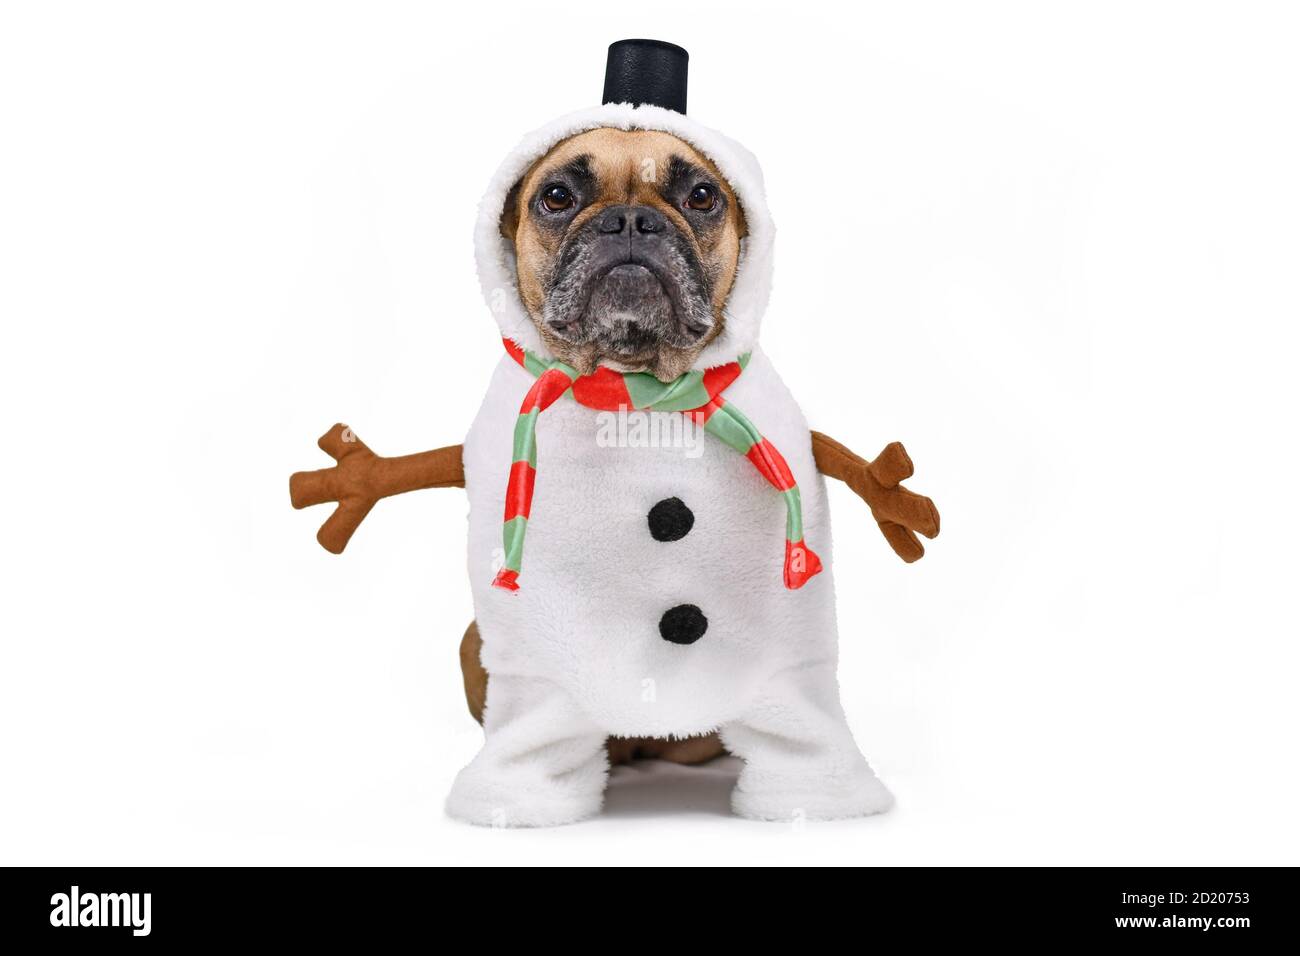 Funny French Bulldog dog dressed up as snowman with full body suit costume with striped scarf, fake stick arms and small top hat on white background Stock Photo